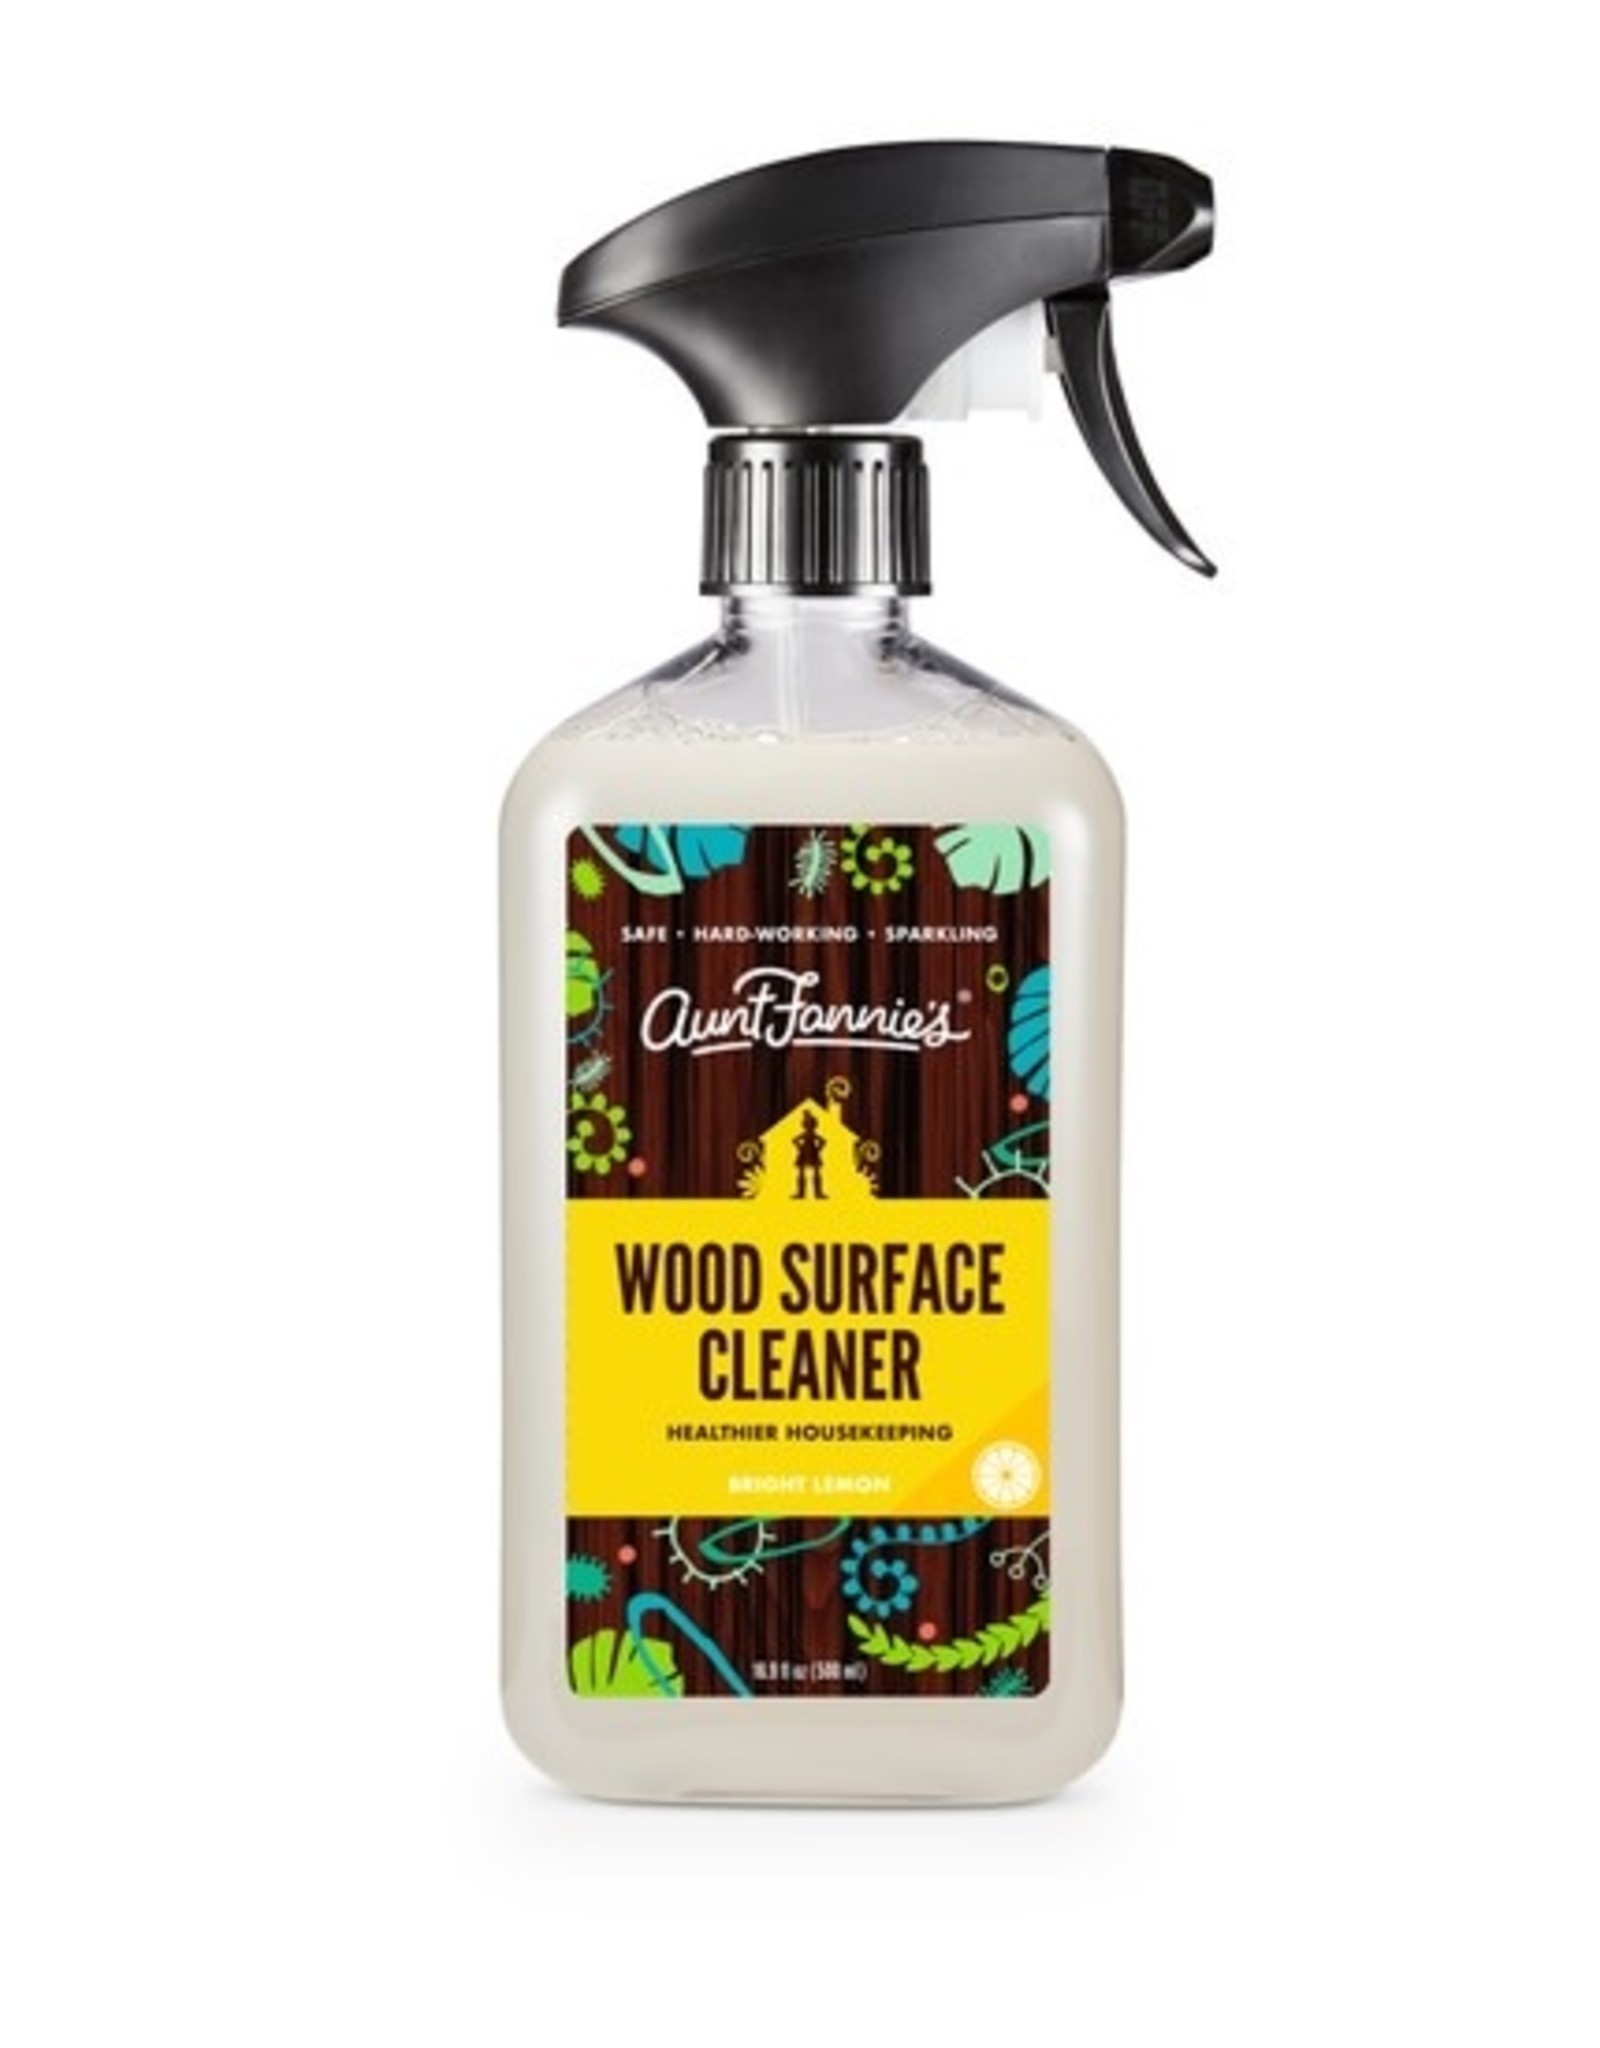 Aunt Fannies Wood Surface Cleaner